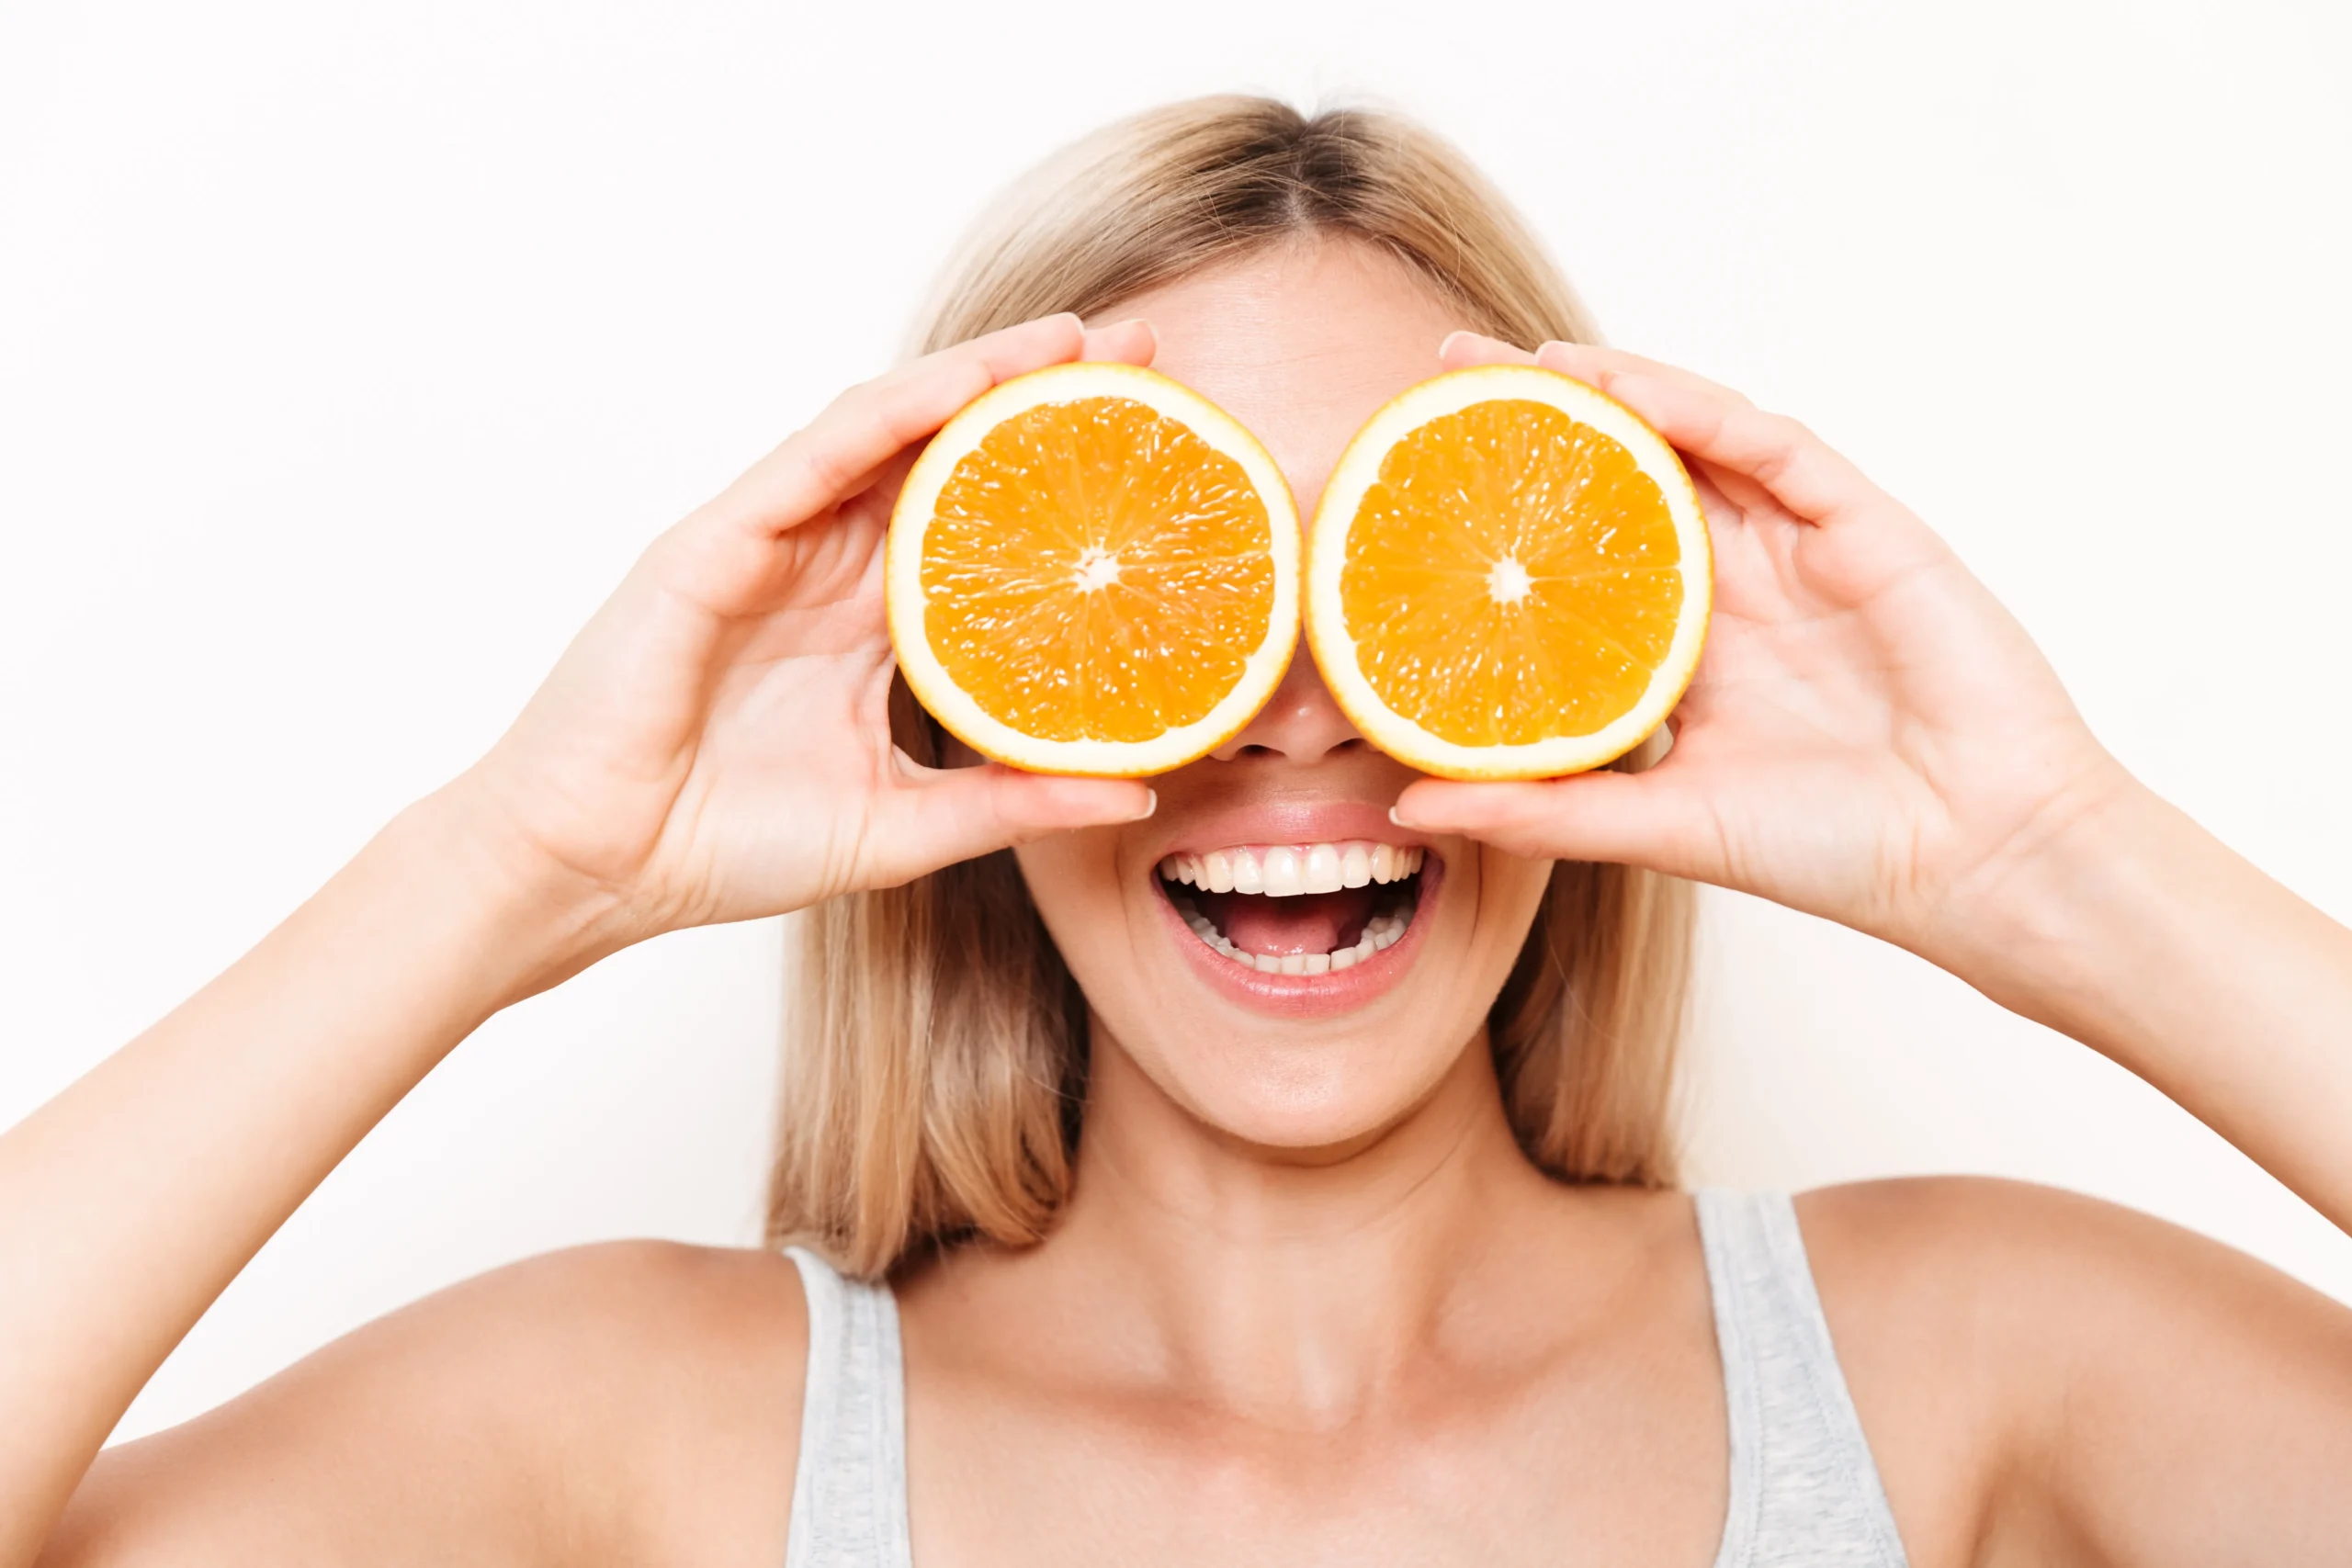 What Are 5 Skin Care Benefits of Vitamin C?